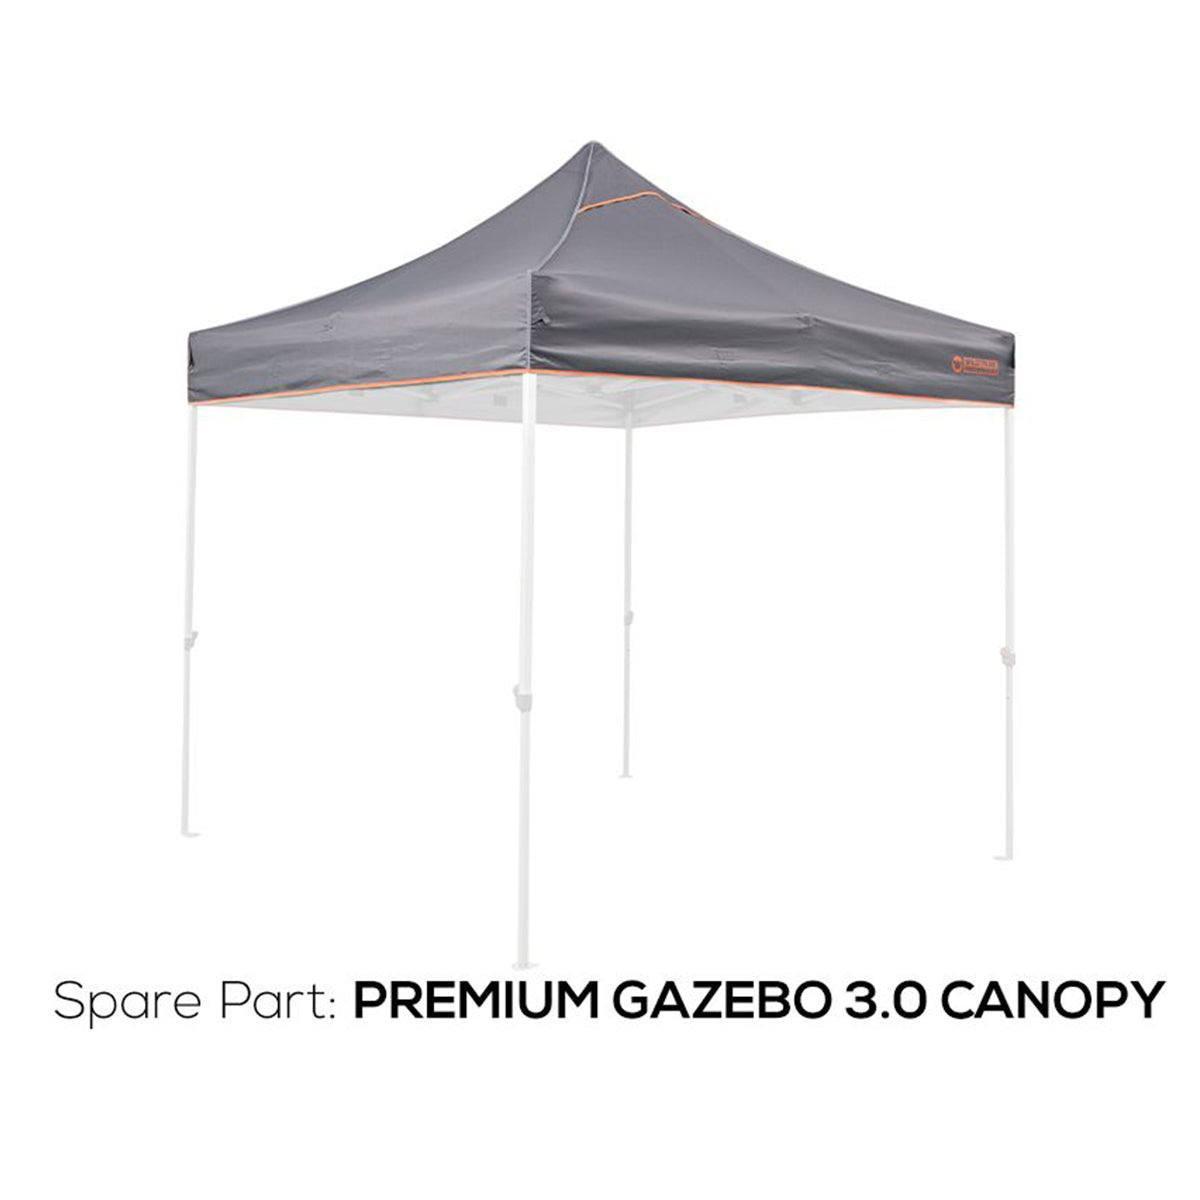 DELUXE GAZEBO 3.0 CANOPY REPLACEMENT